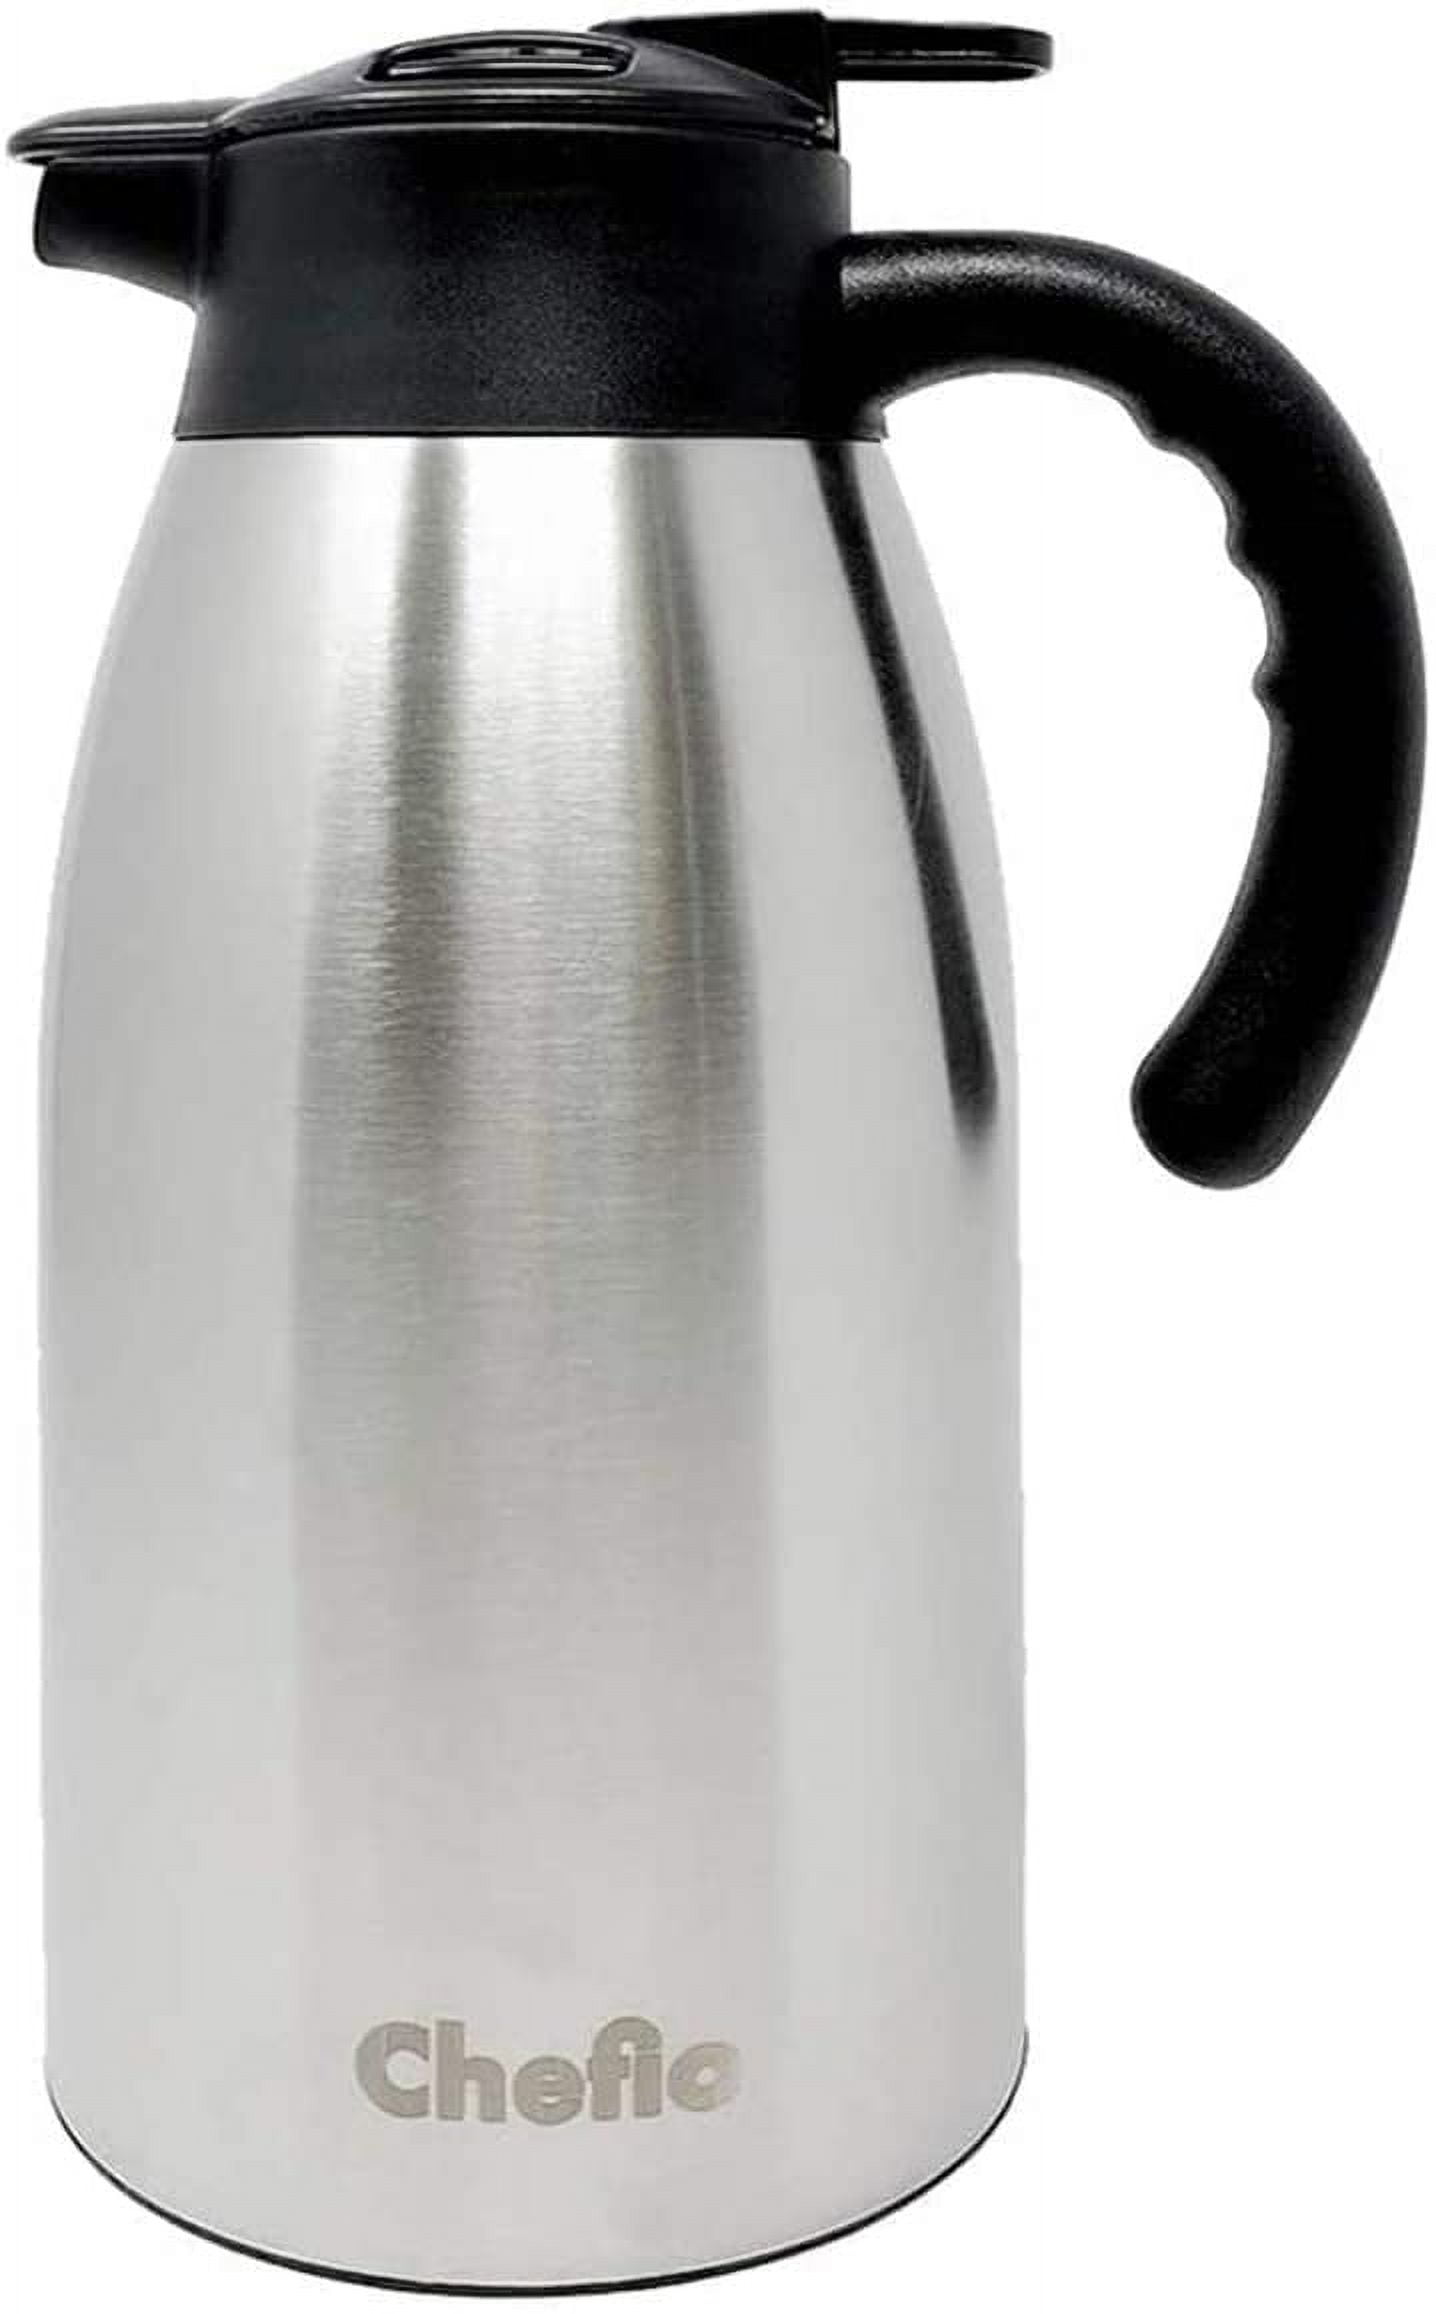 2300ML Stainless Steel Thermal Coffee Carafe Double Wall Insulated